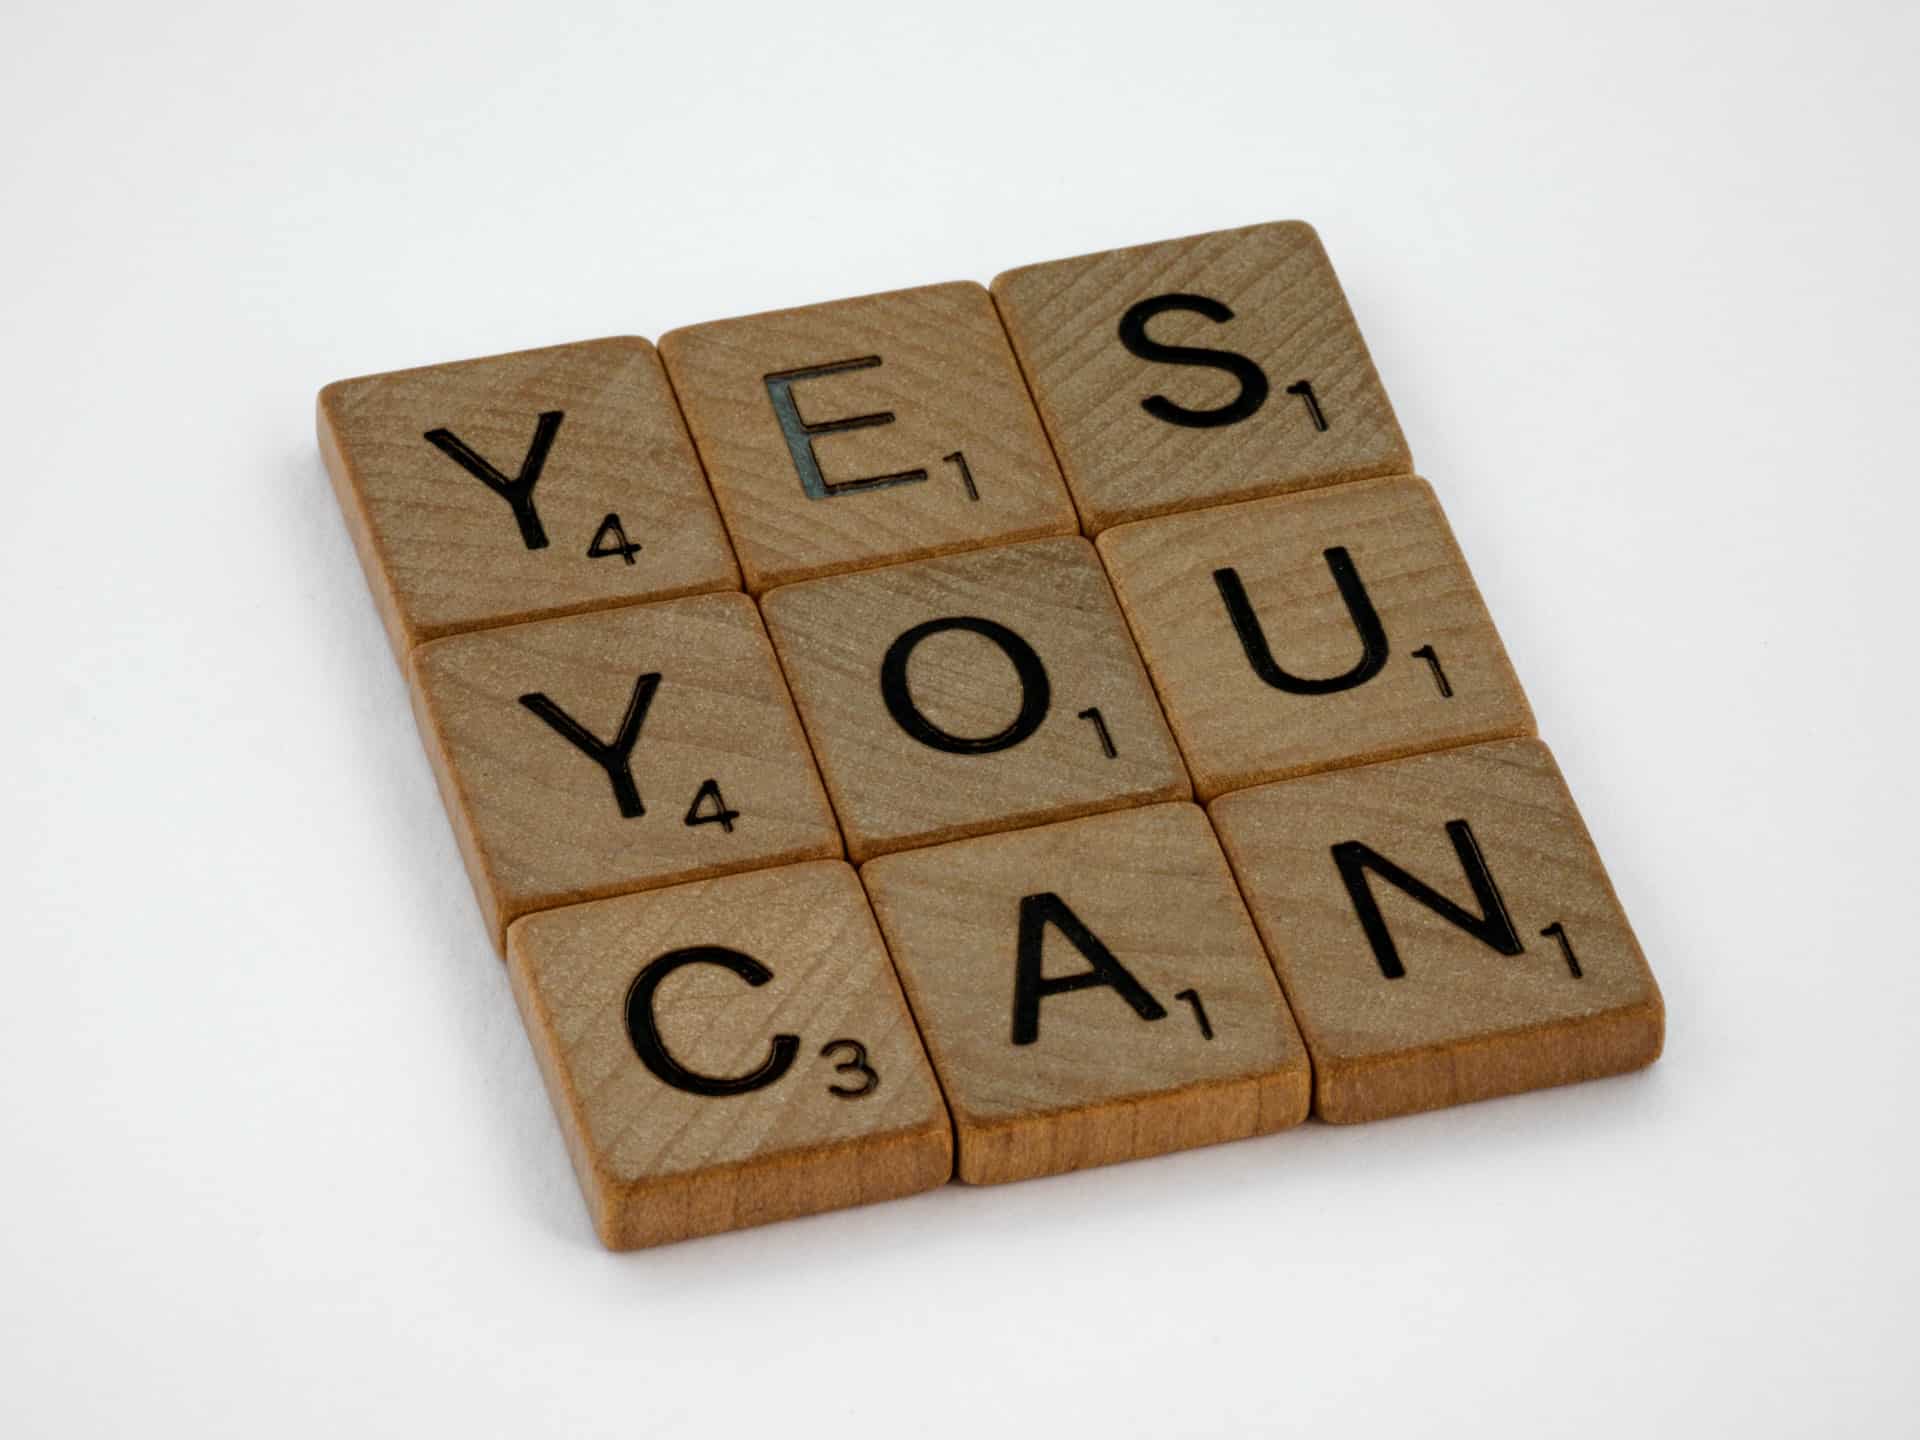 scrabble puzzle pieces spelling "yes you can"